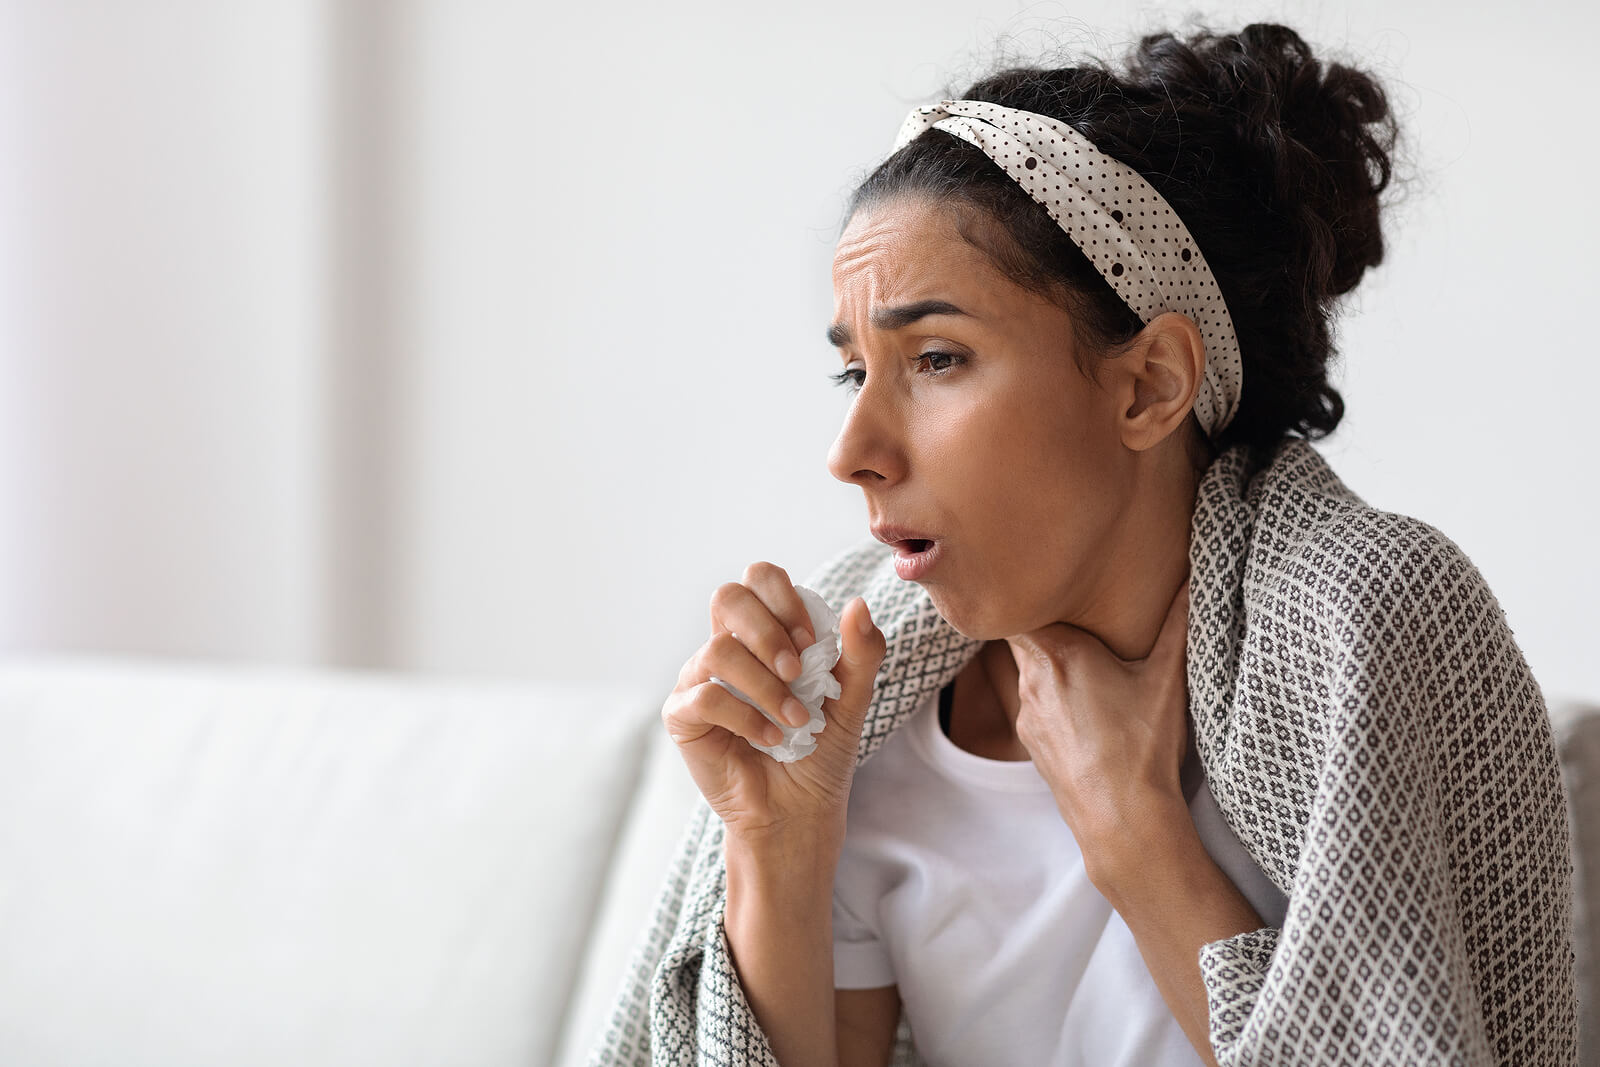 Differences between cold and flu include symptoms